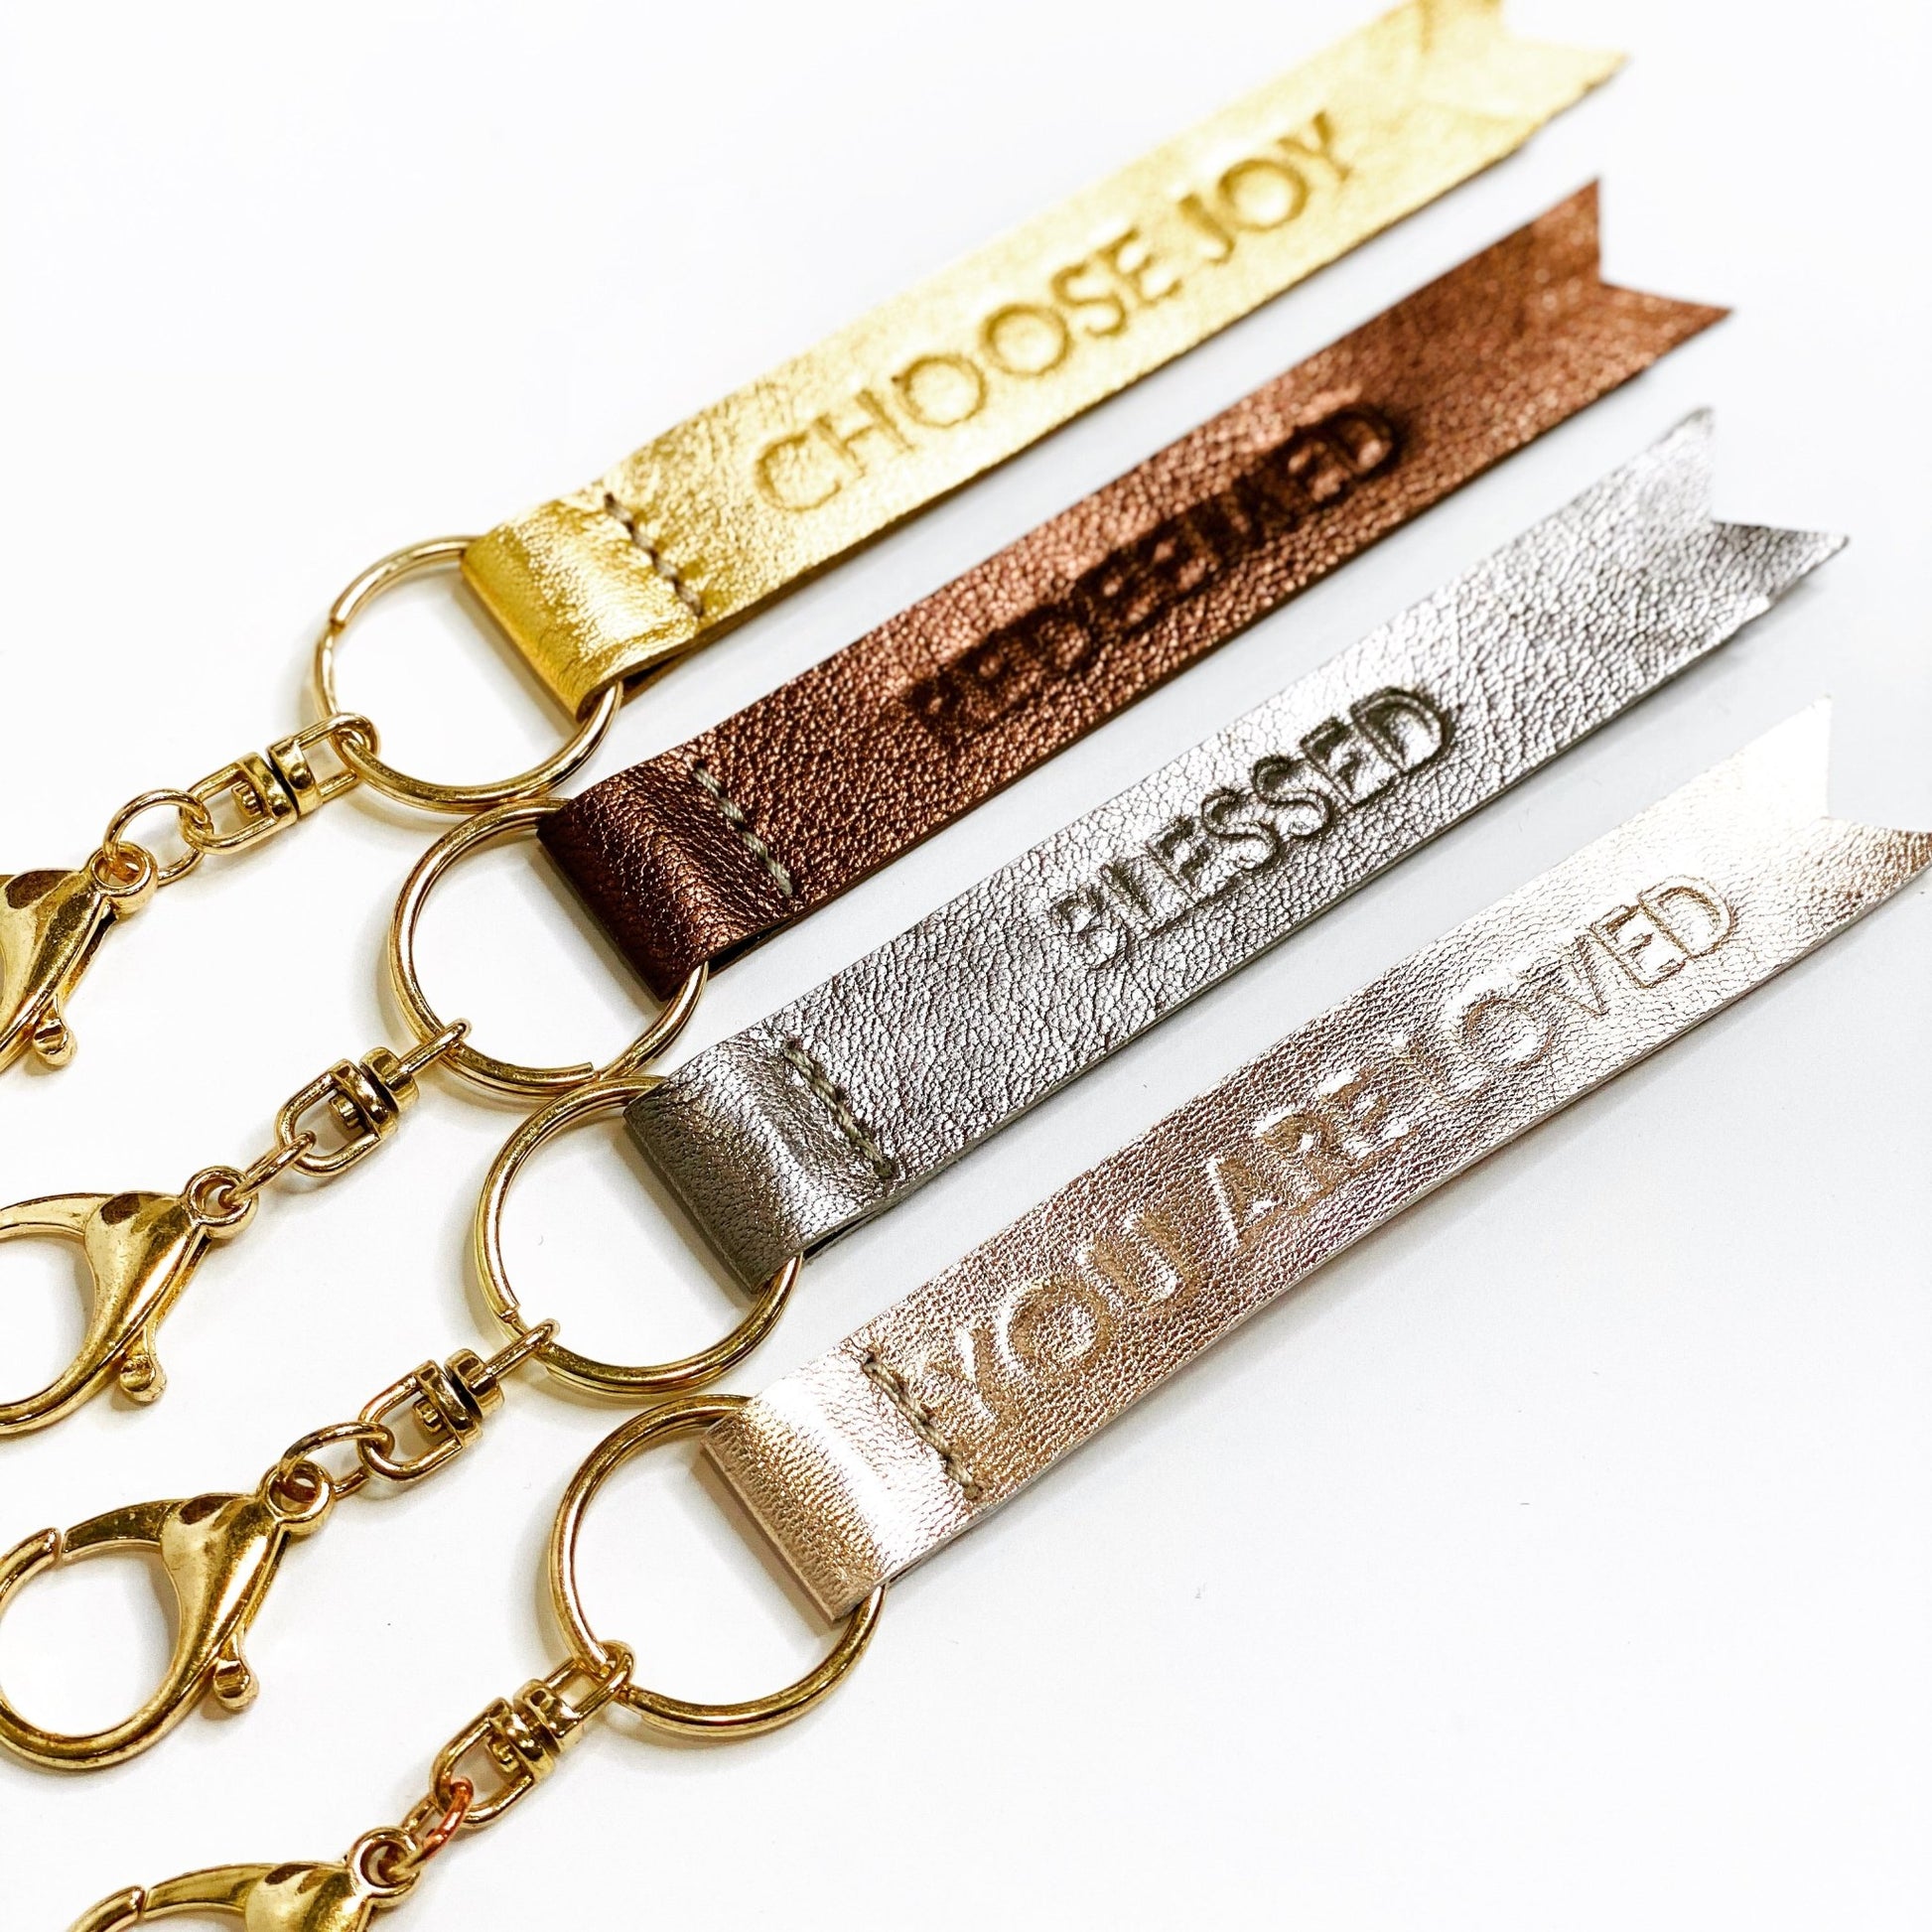 Metallic Leather Keychain {Blessed} - Global Hues Market